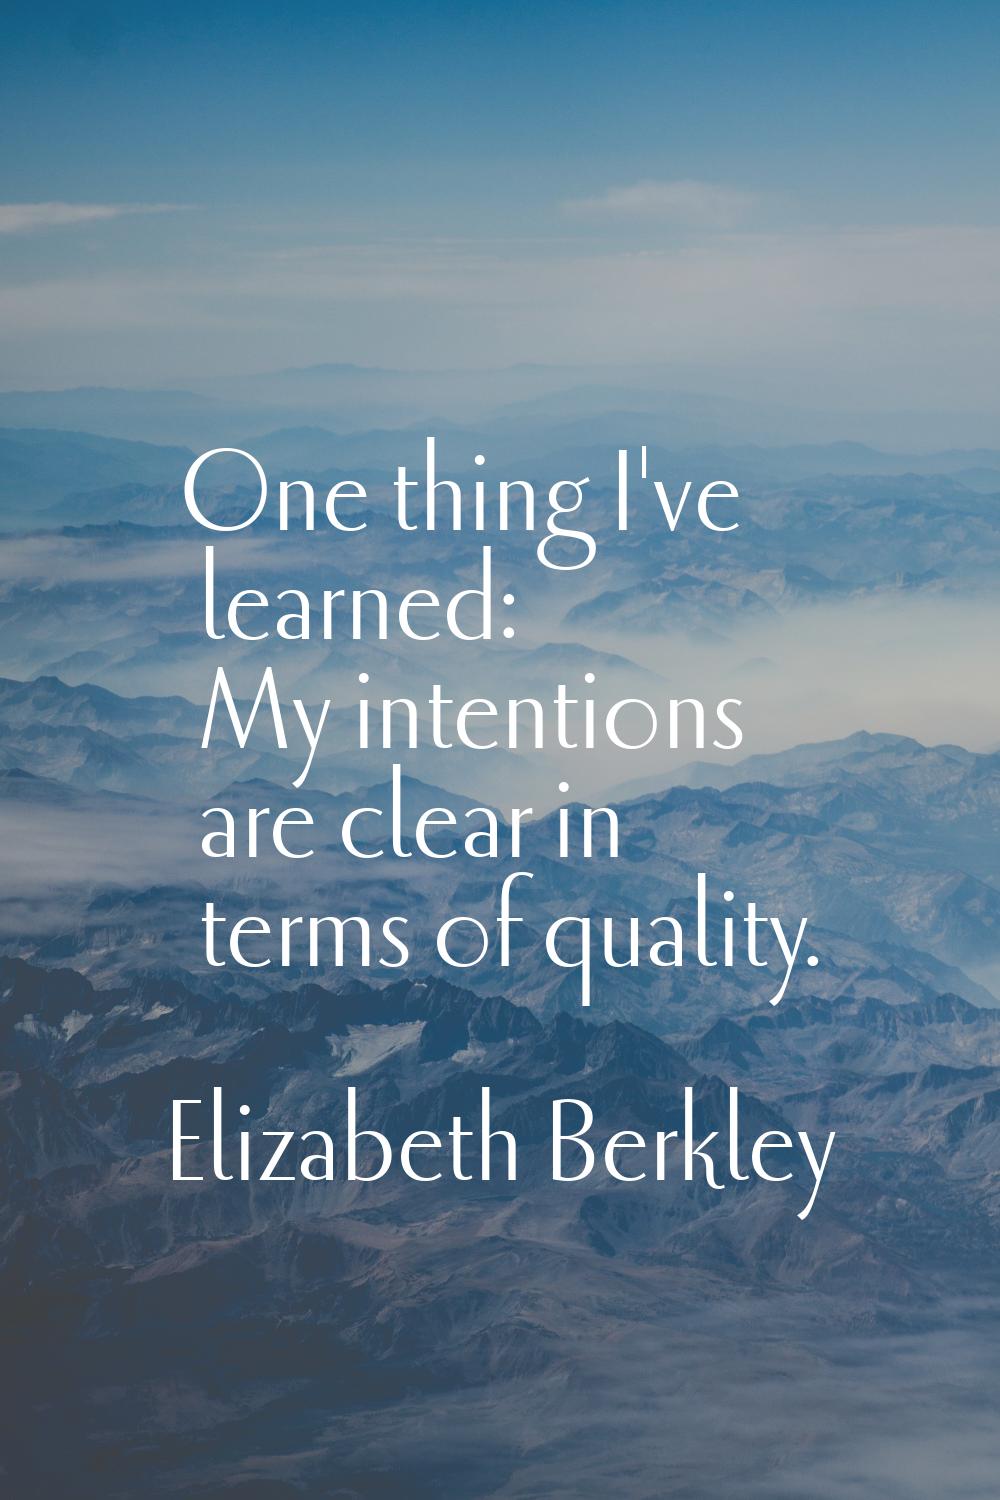 One thing I've learned: My intentions are clear in terms of quality.